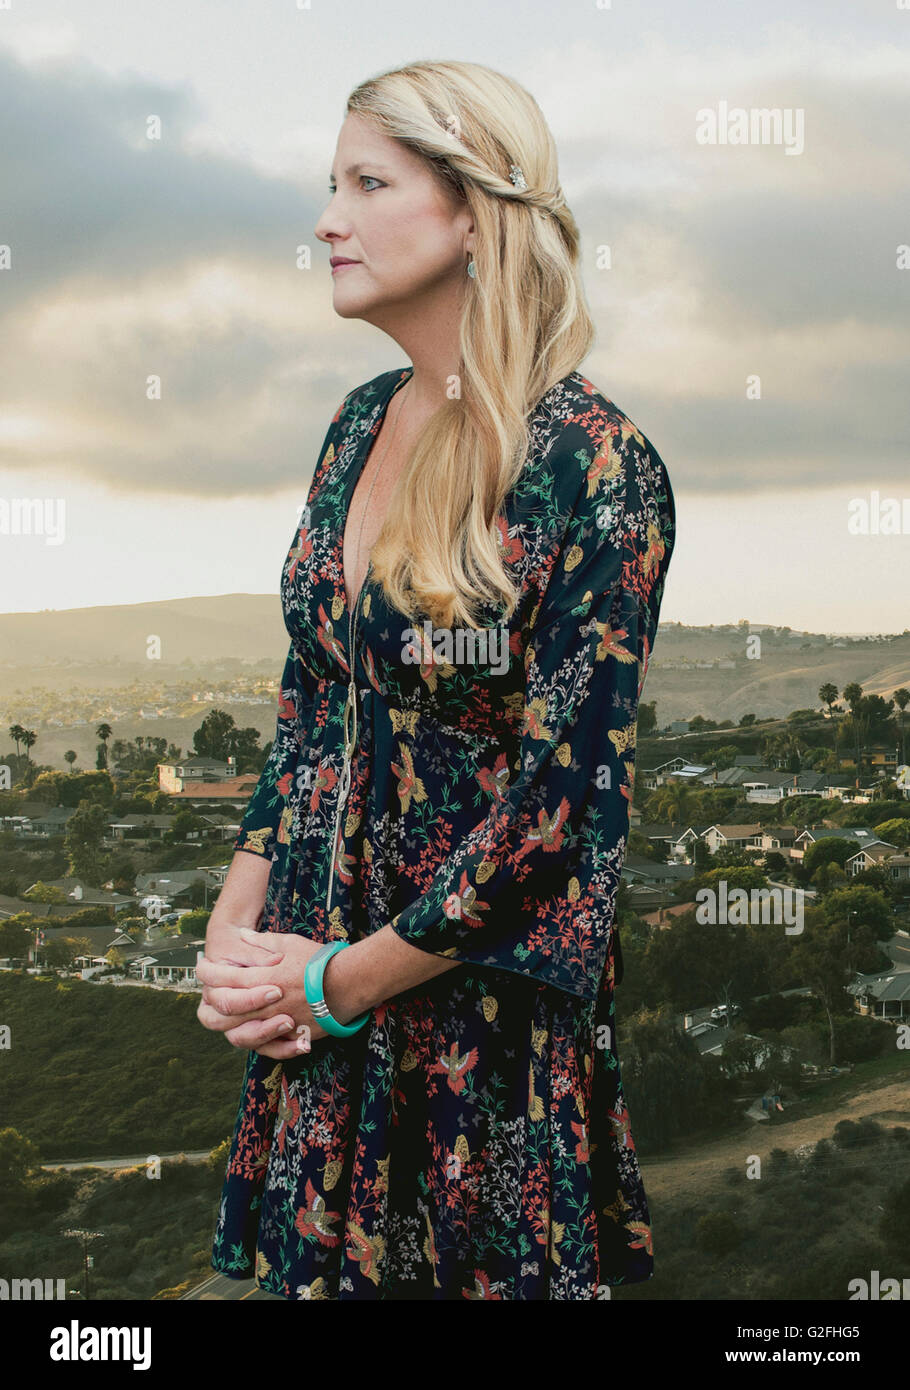 Portrait of Woman with Long Blonde Hair Against Neighborhood Landscape Stock Photo